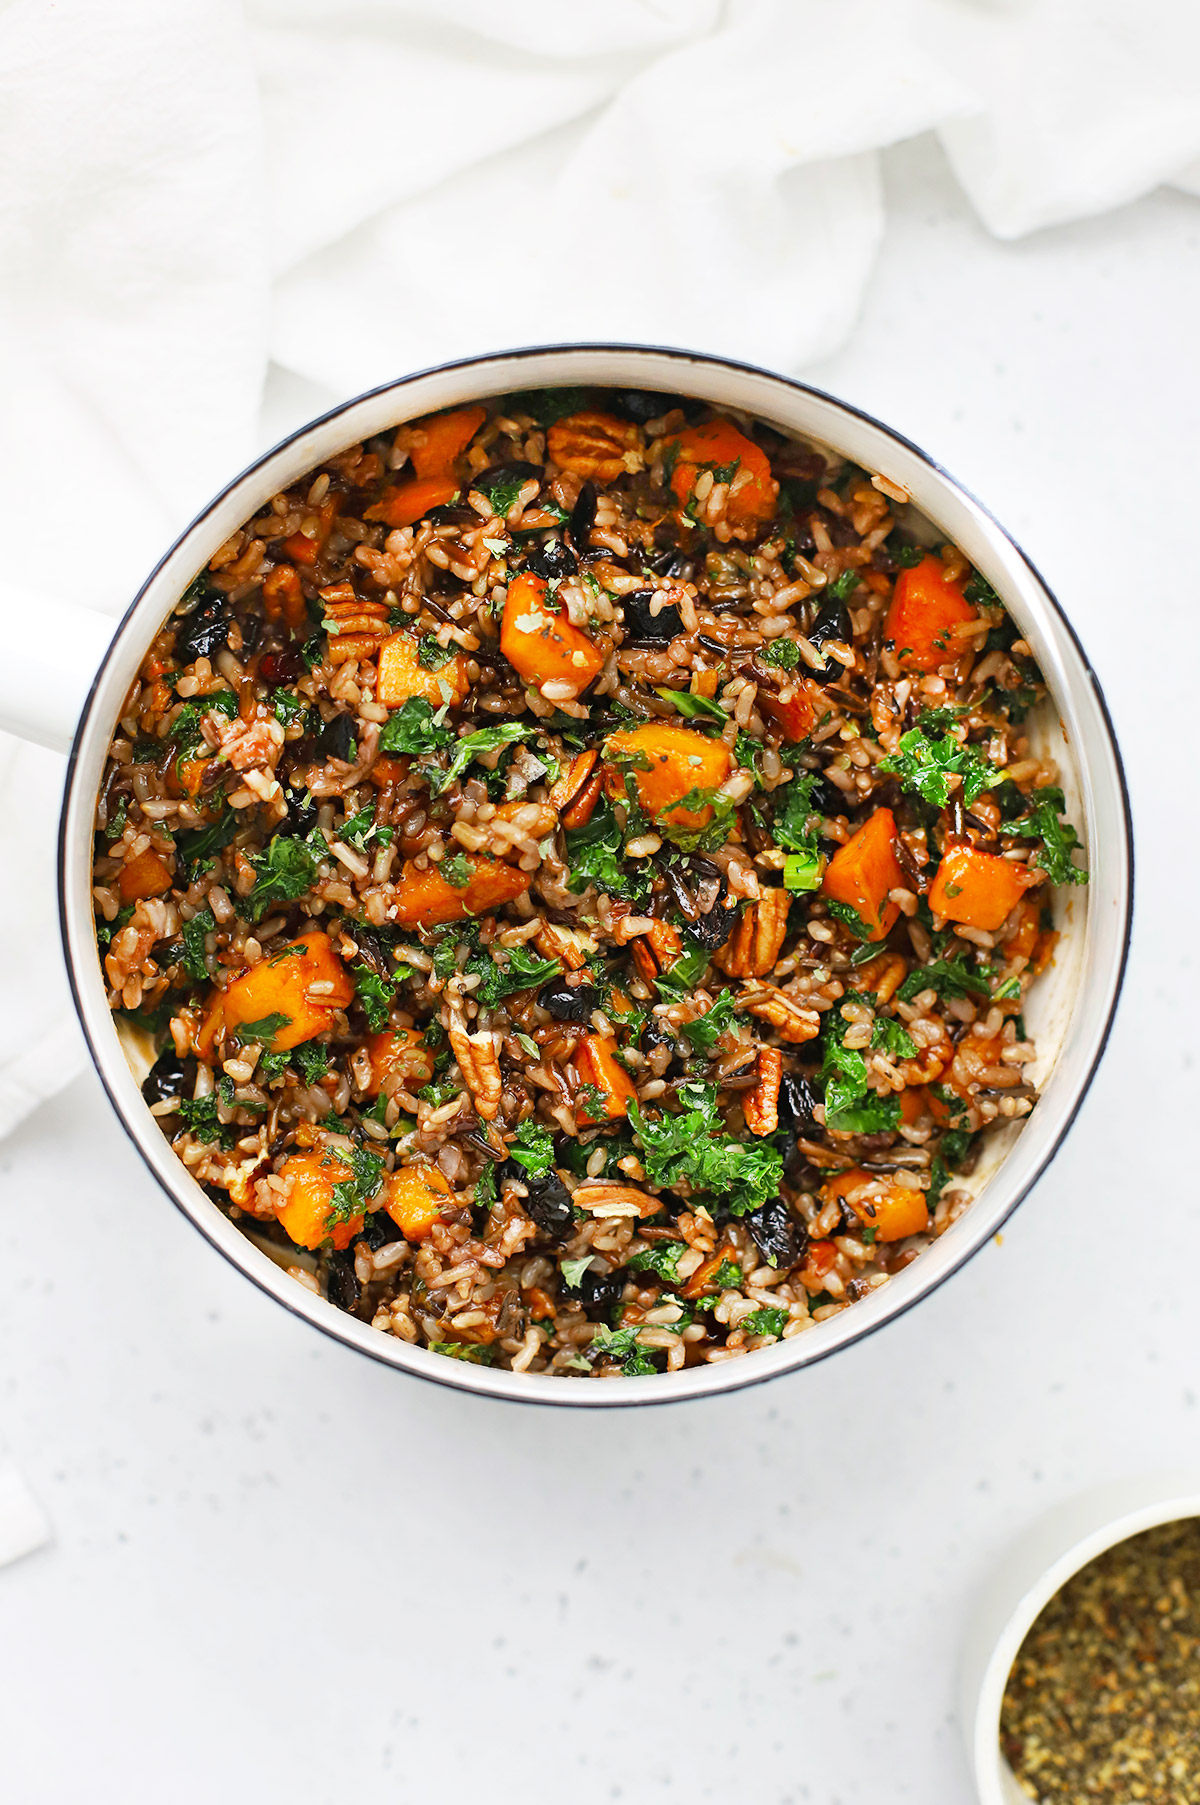 Overhead view of a saucepan of Wild Rice Pilaf with Butternut Squash, Kale, Dried Cranberries, and Pecans